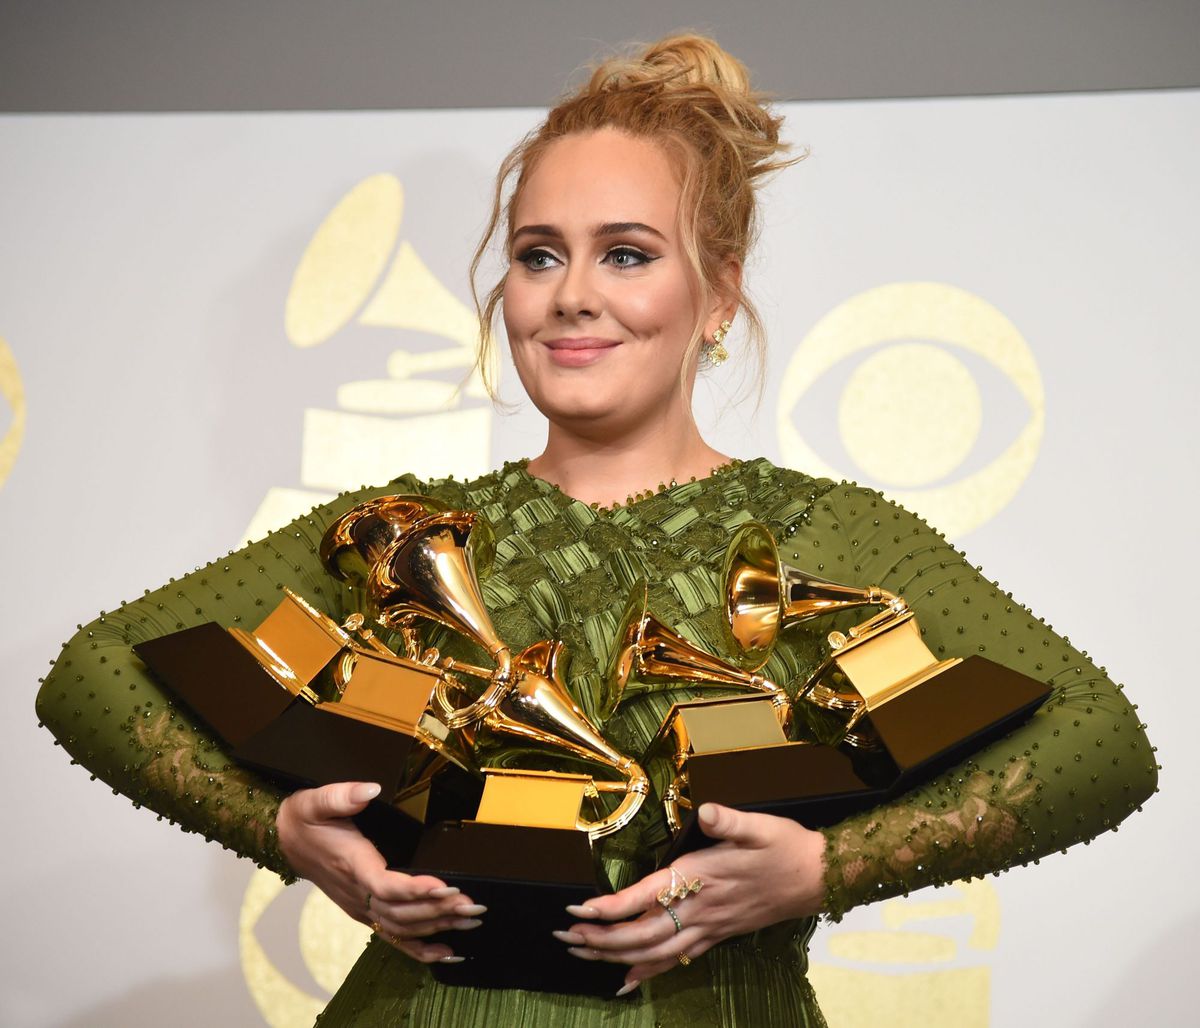 Adele Said the Conversation About Her Weight Lost Hurt Her Feelings